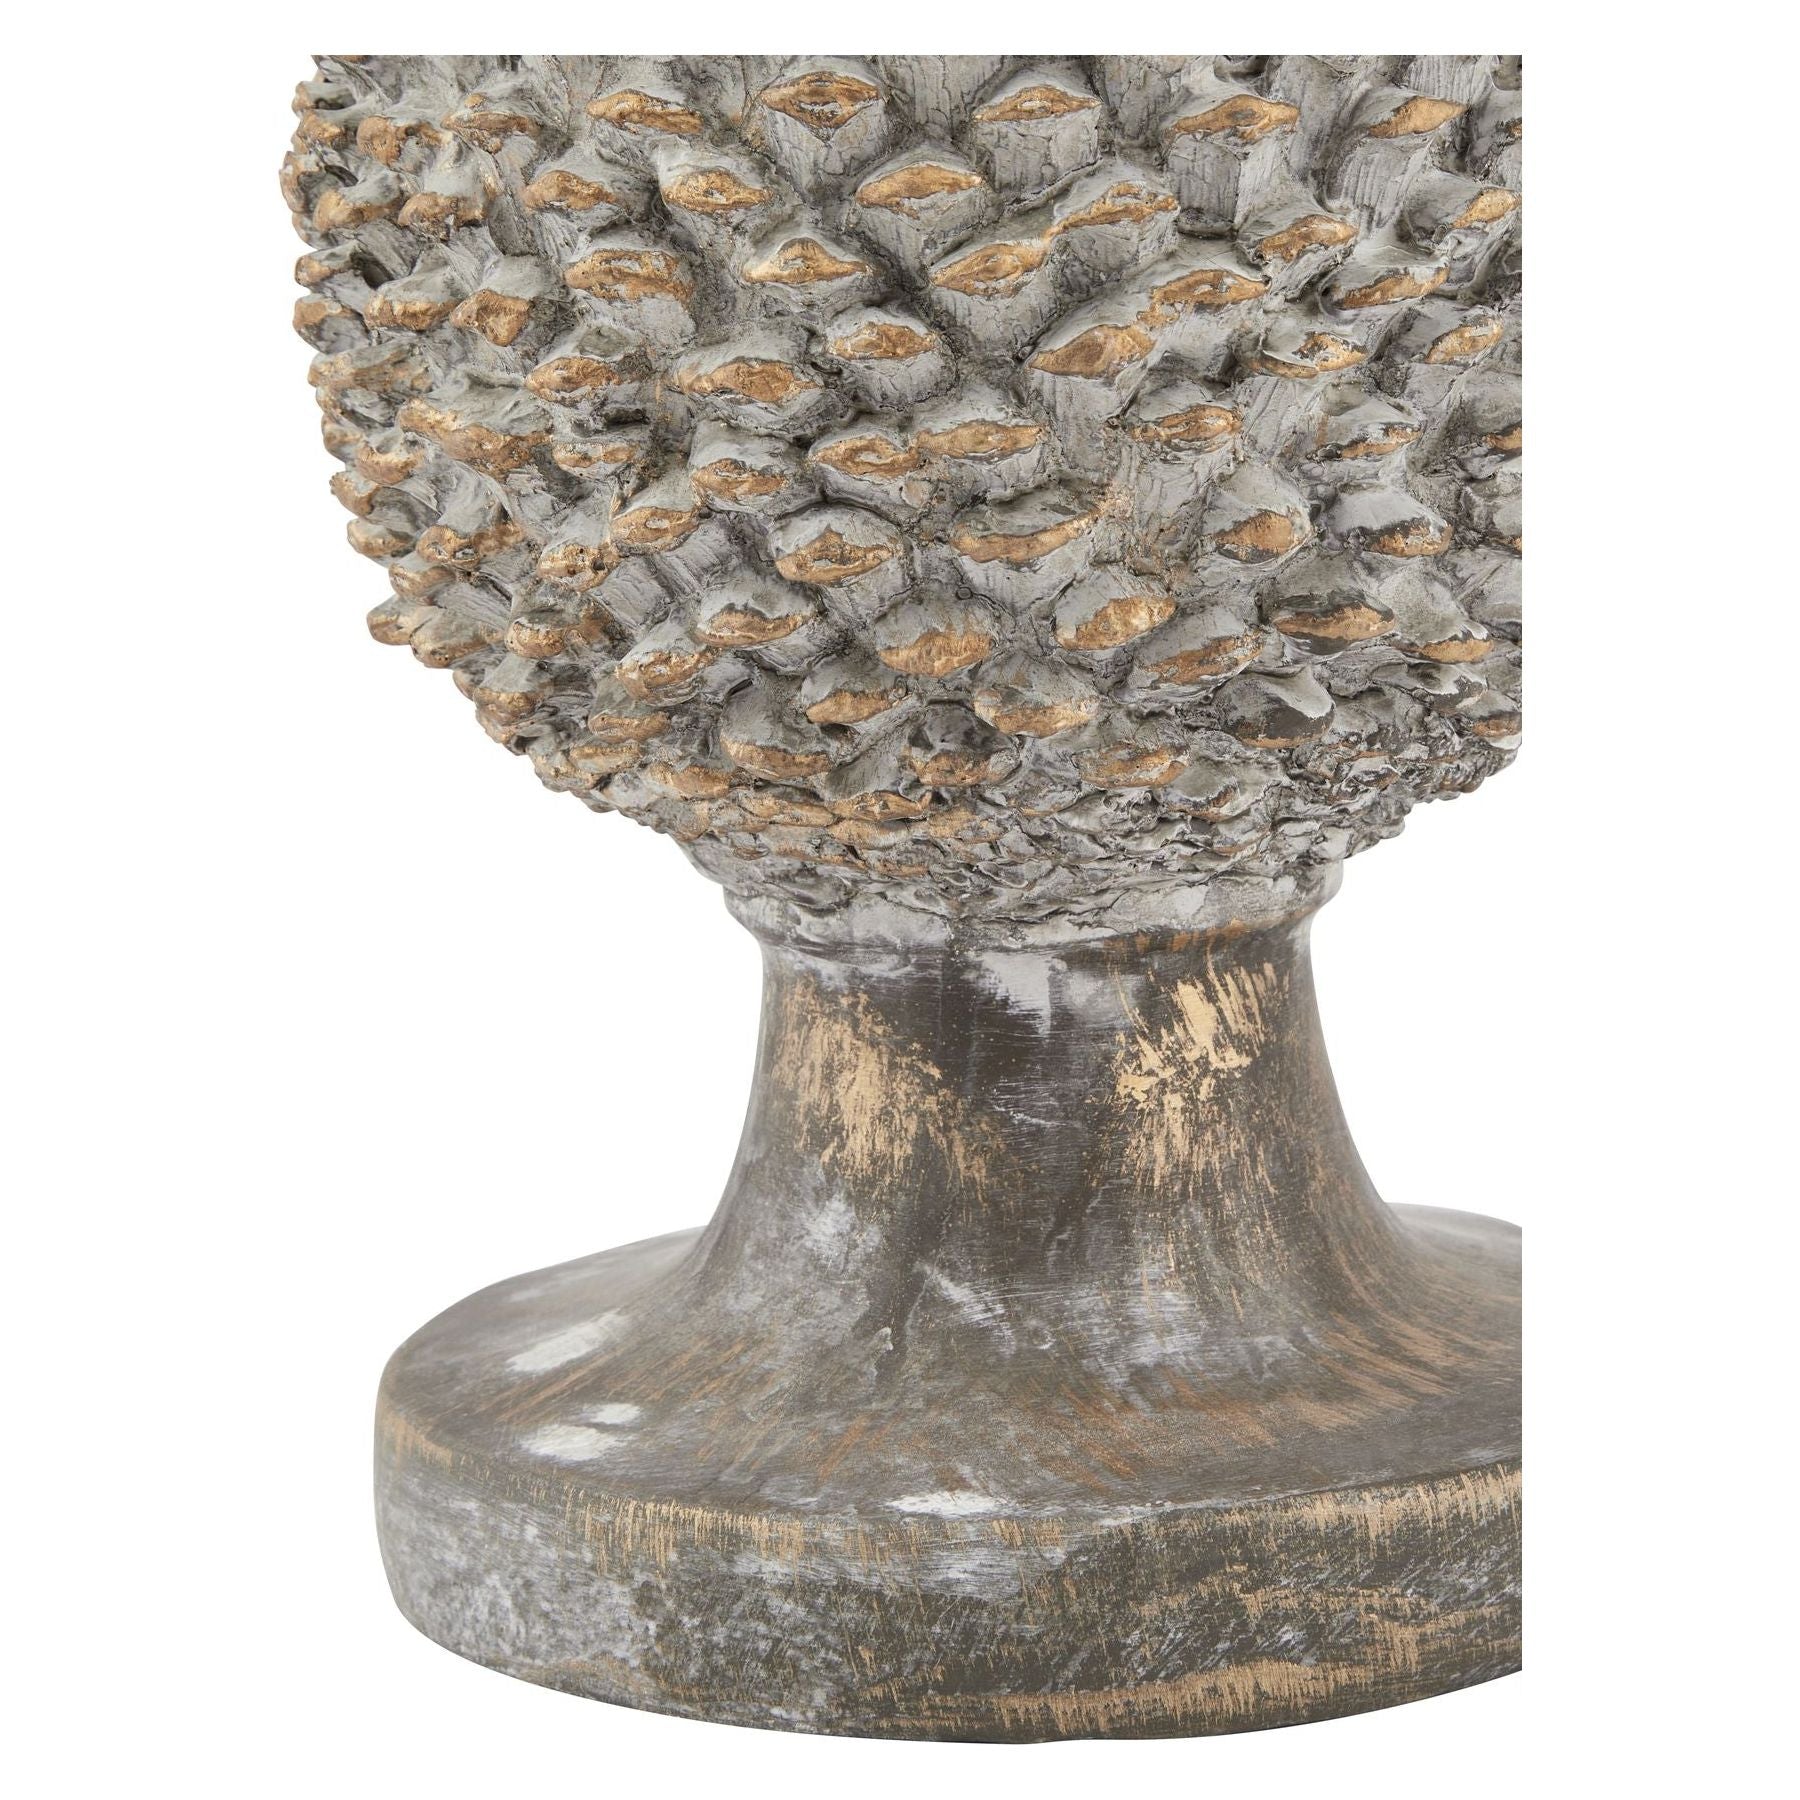 Stone Effect Pinecone Ornament With Gold Accents - Ashton and Finch